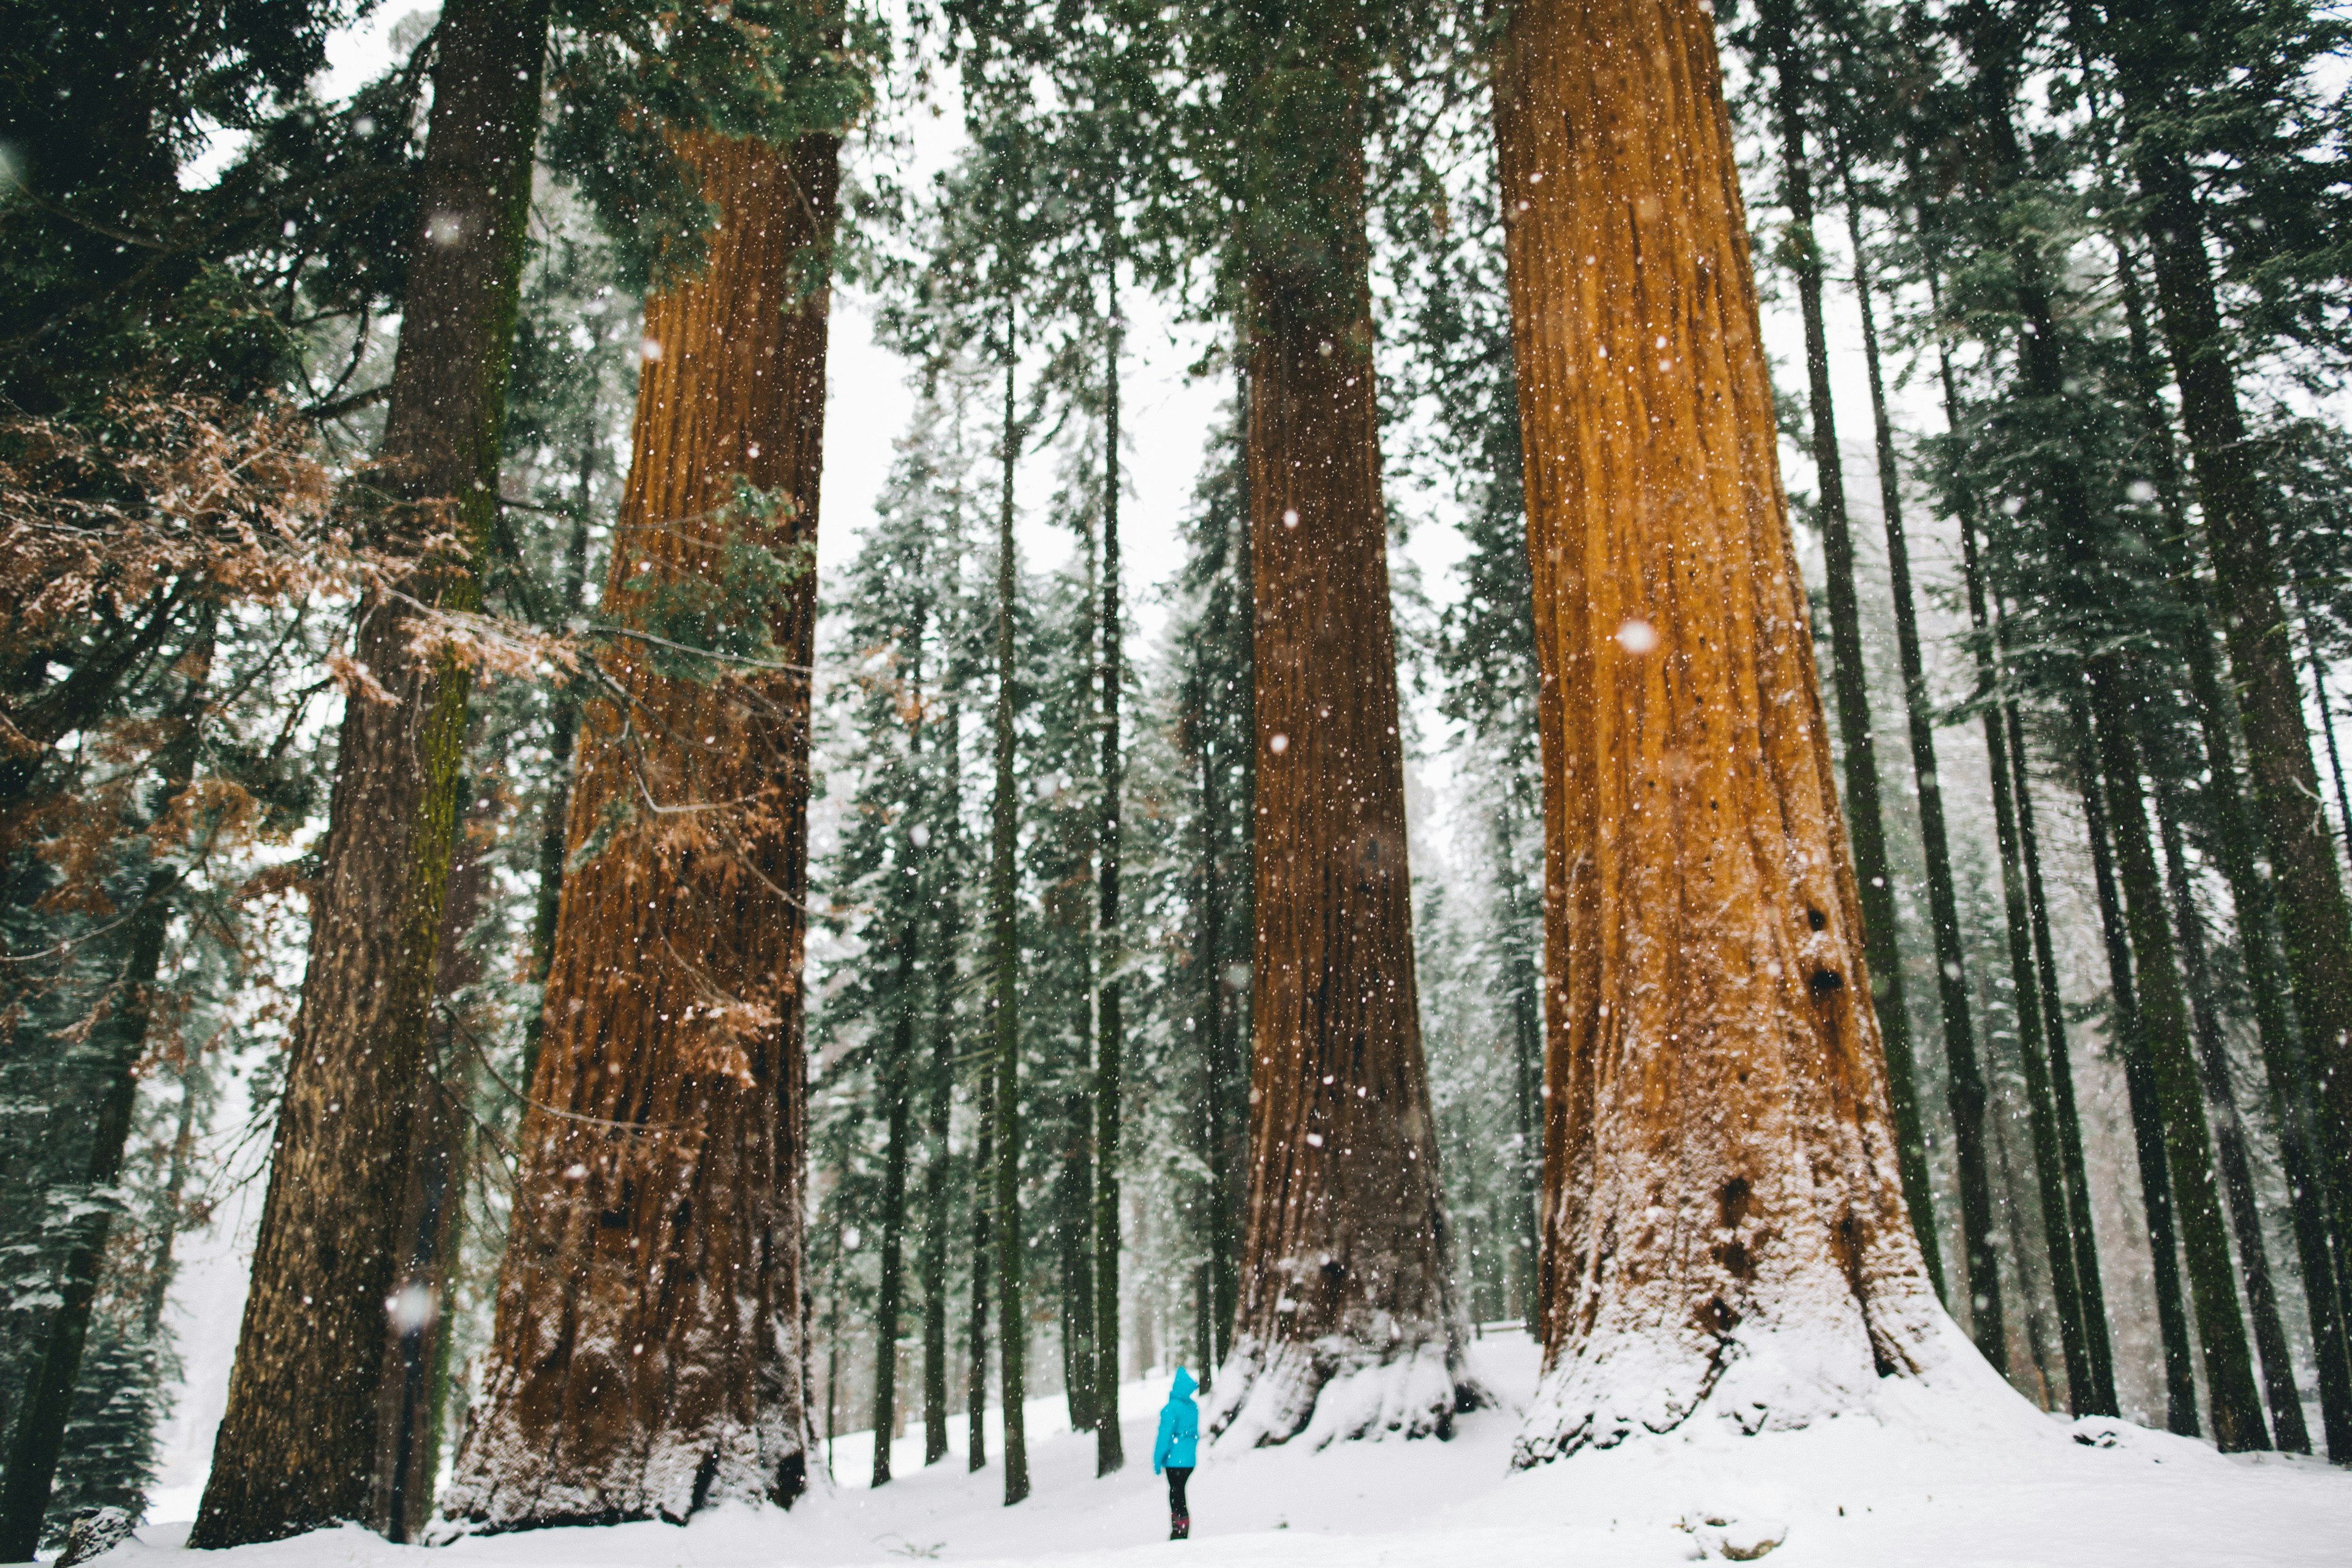 A woman standing by giant snow-covered Sequoia trees in the Sequoia National Park.